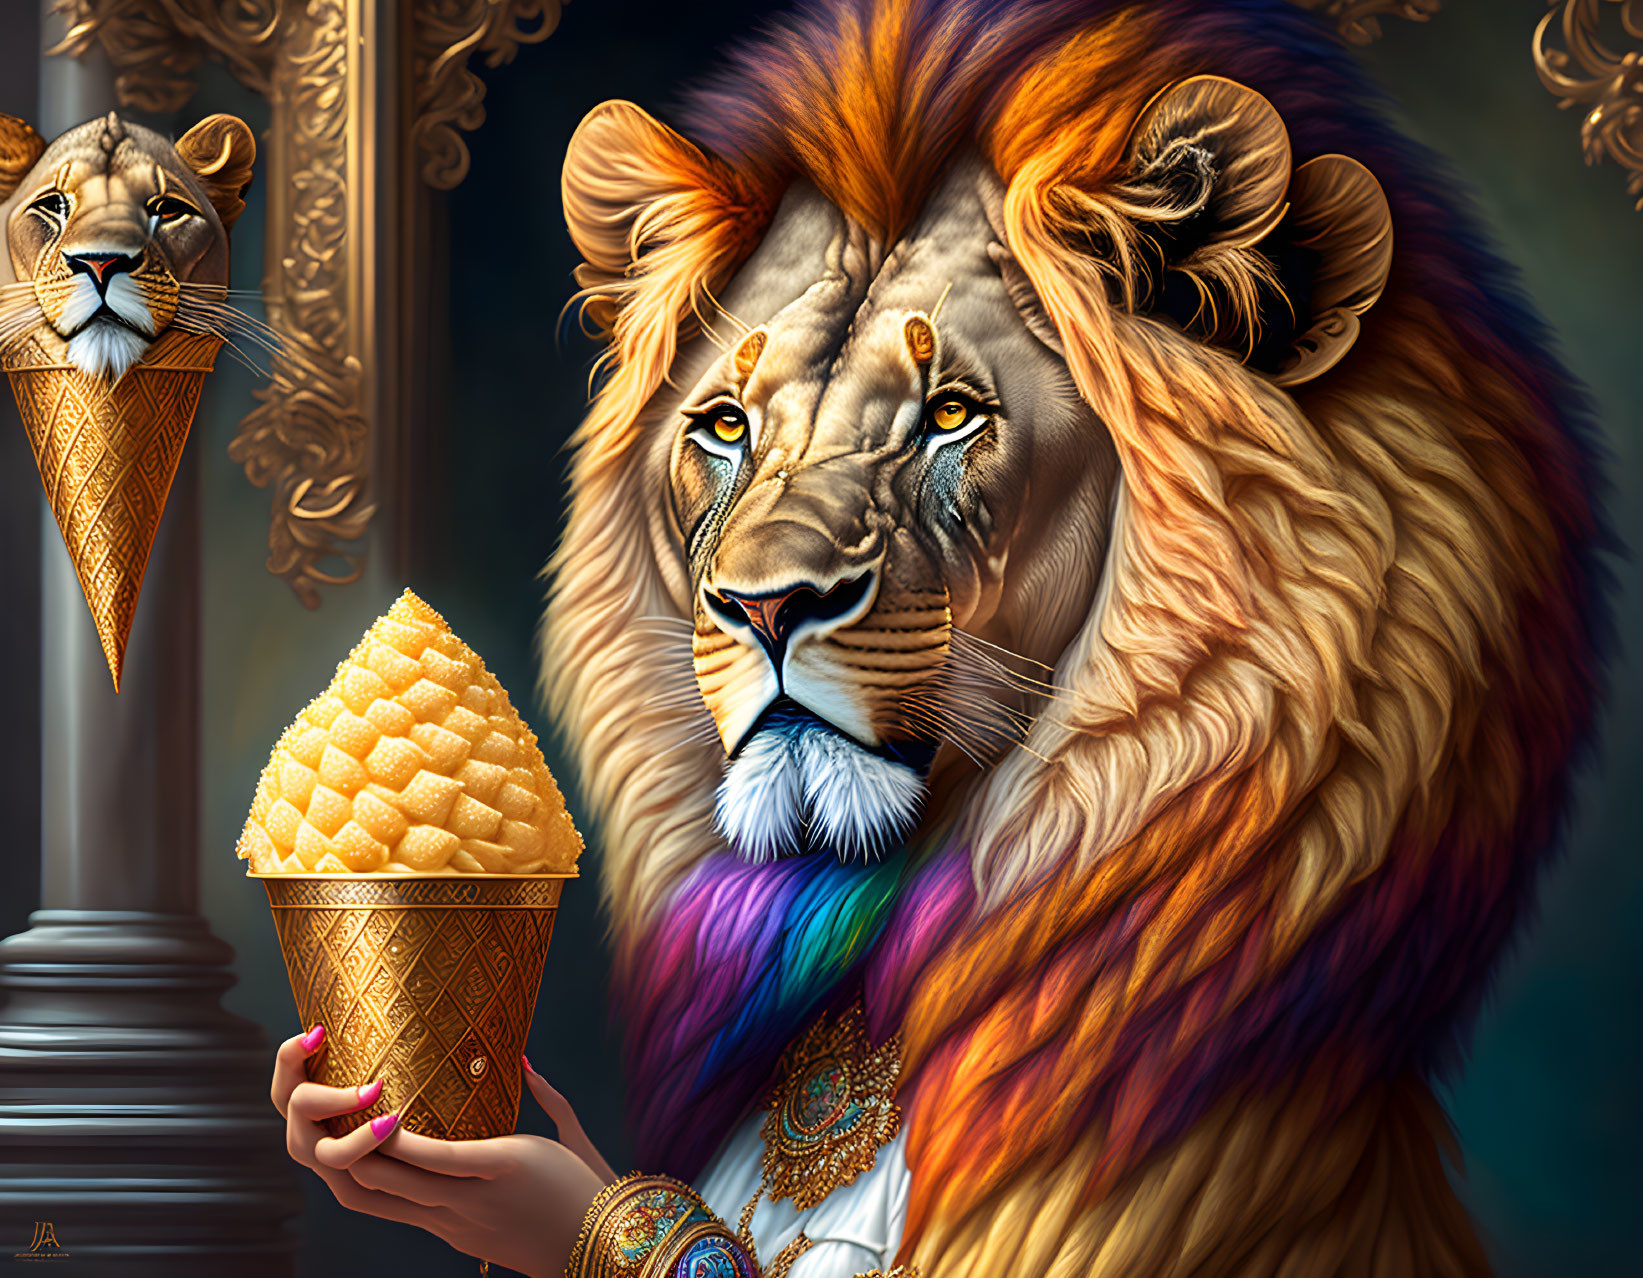 Colorful lion with rainbow mane and golden waffle cone amidst baroque decor and lion sculpture.